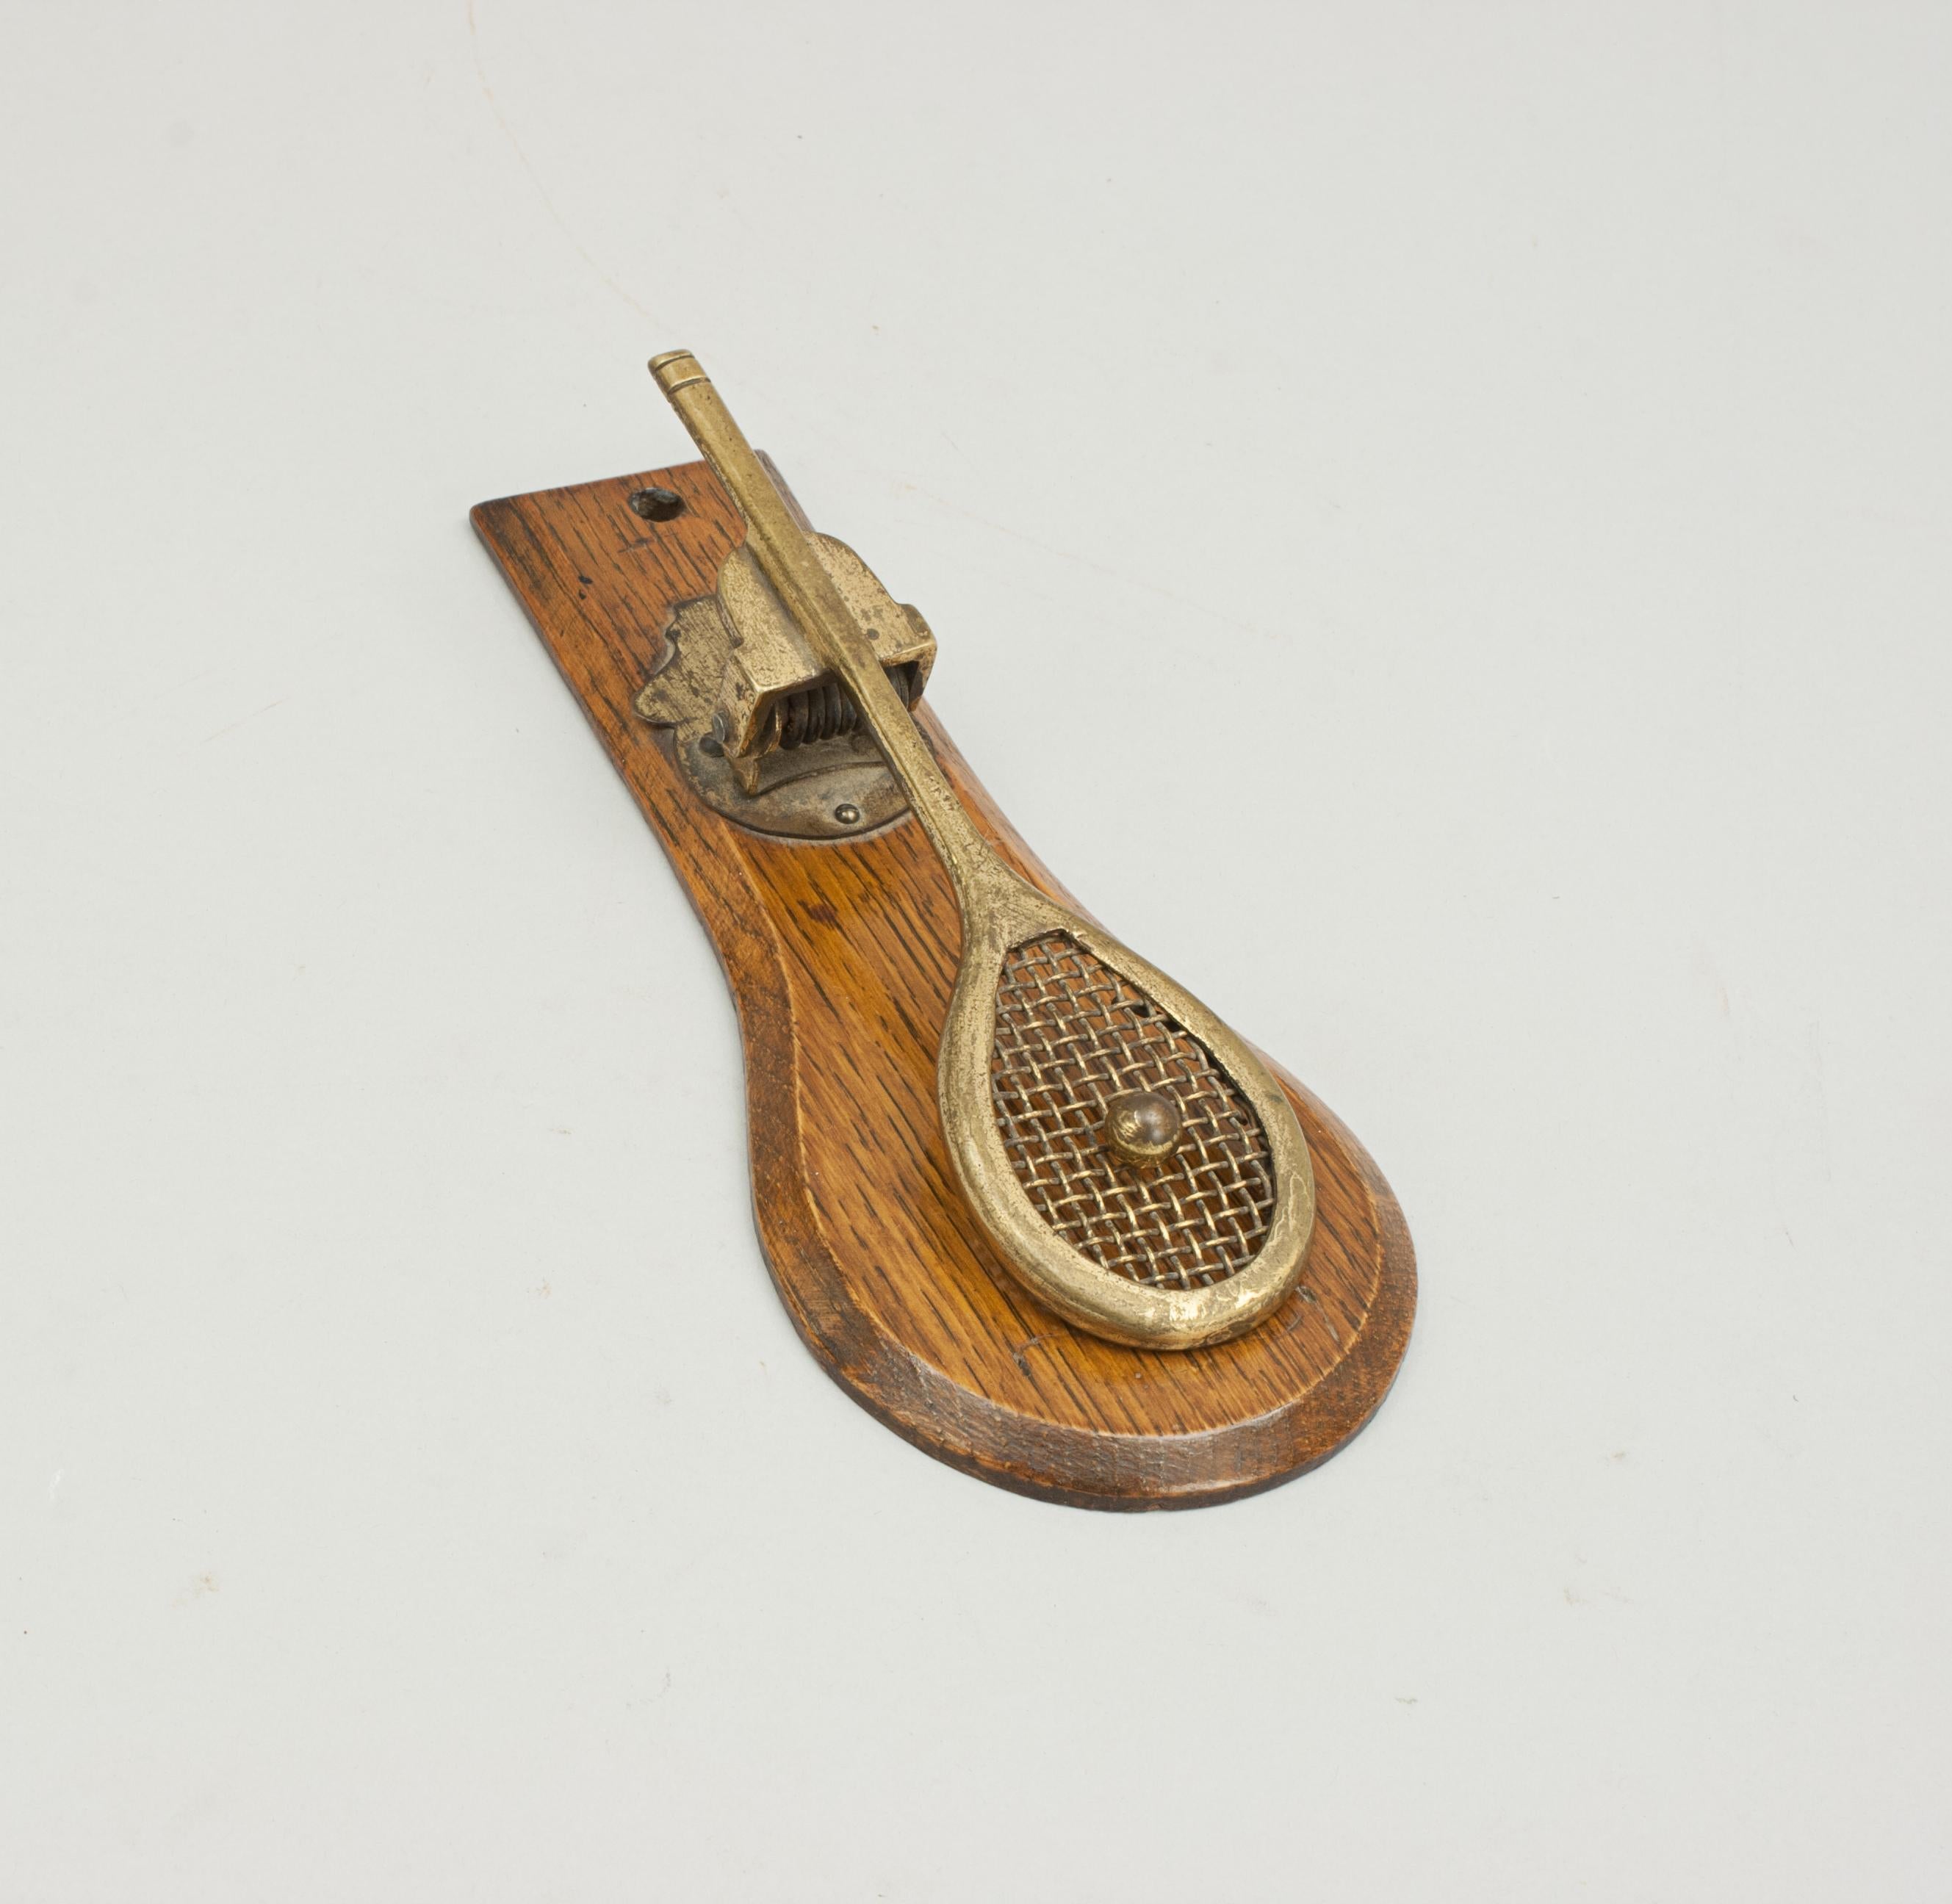 Vintage Oak & brass Tennis racket paper clip.
A good spring-loaded paper clip in the form of a tennis racket (with wire stringing). The brass racket is mounted onto a shaped oak back board.
A very nice tennis collectable desk